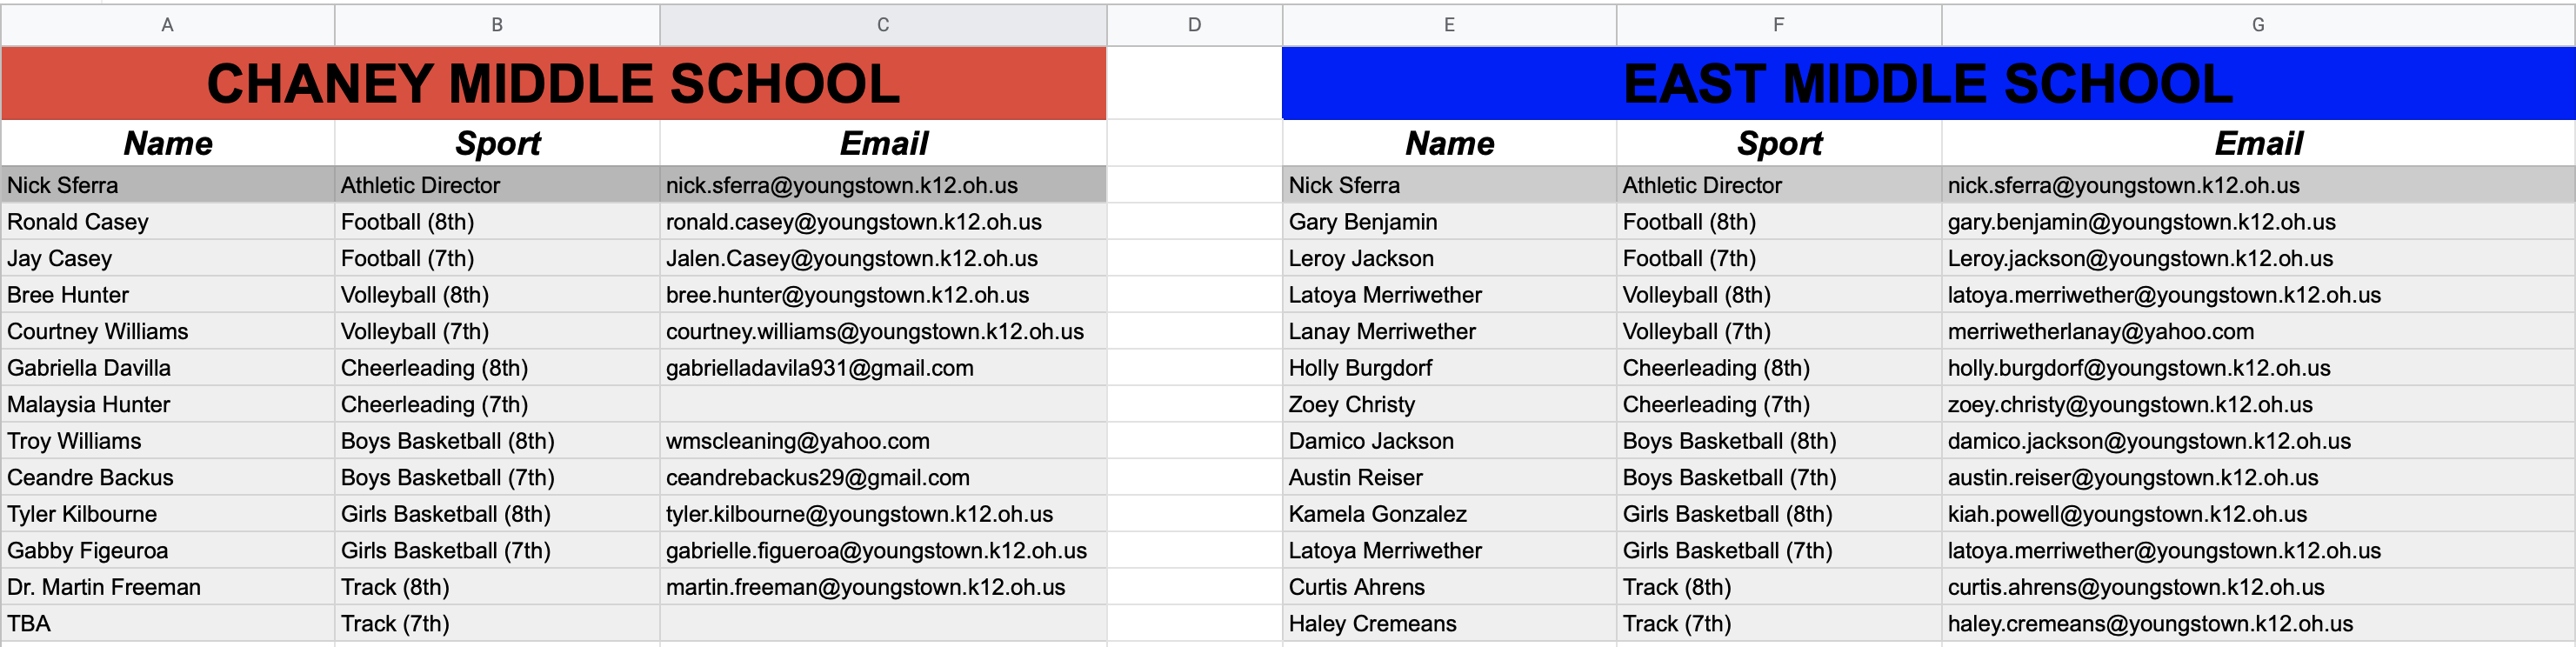 List of coaching contacts for Chaney Middle School, on the left in red  and East Middle School, on the right under blue